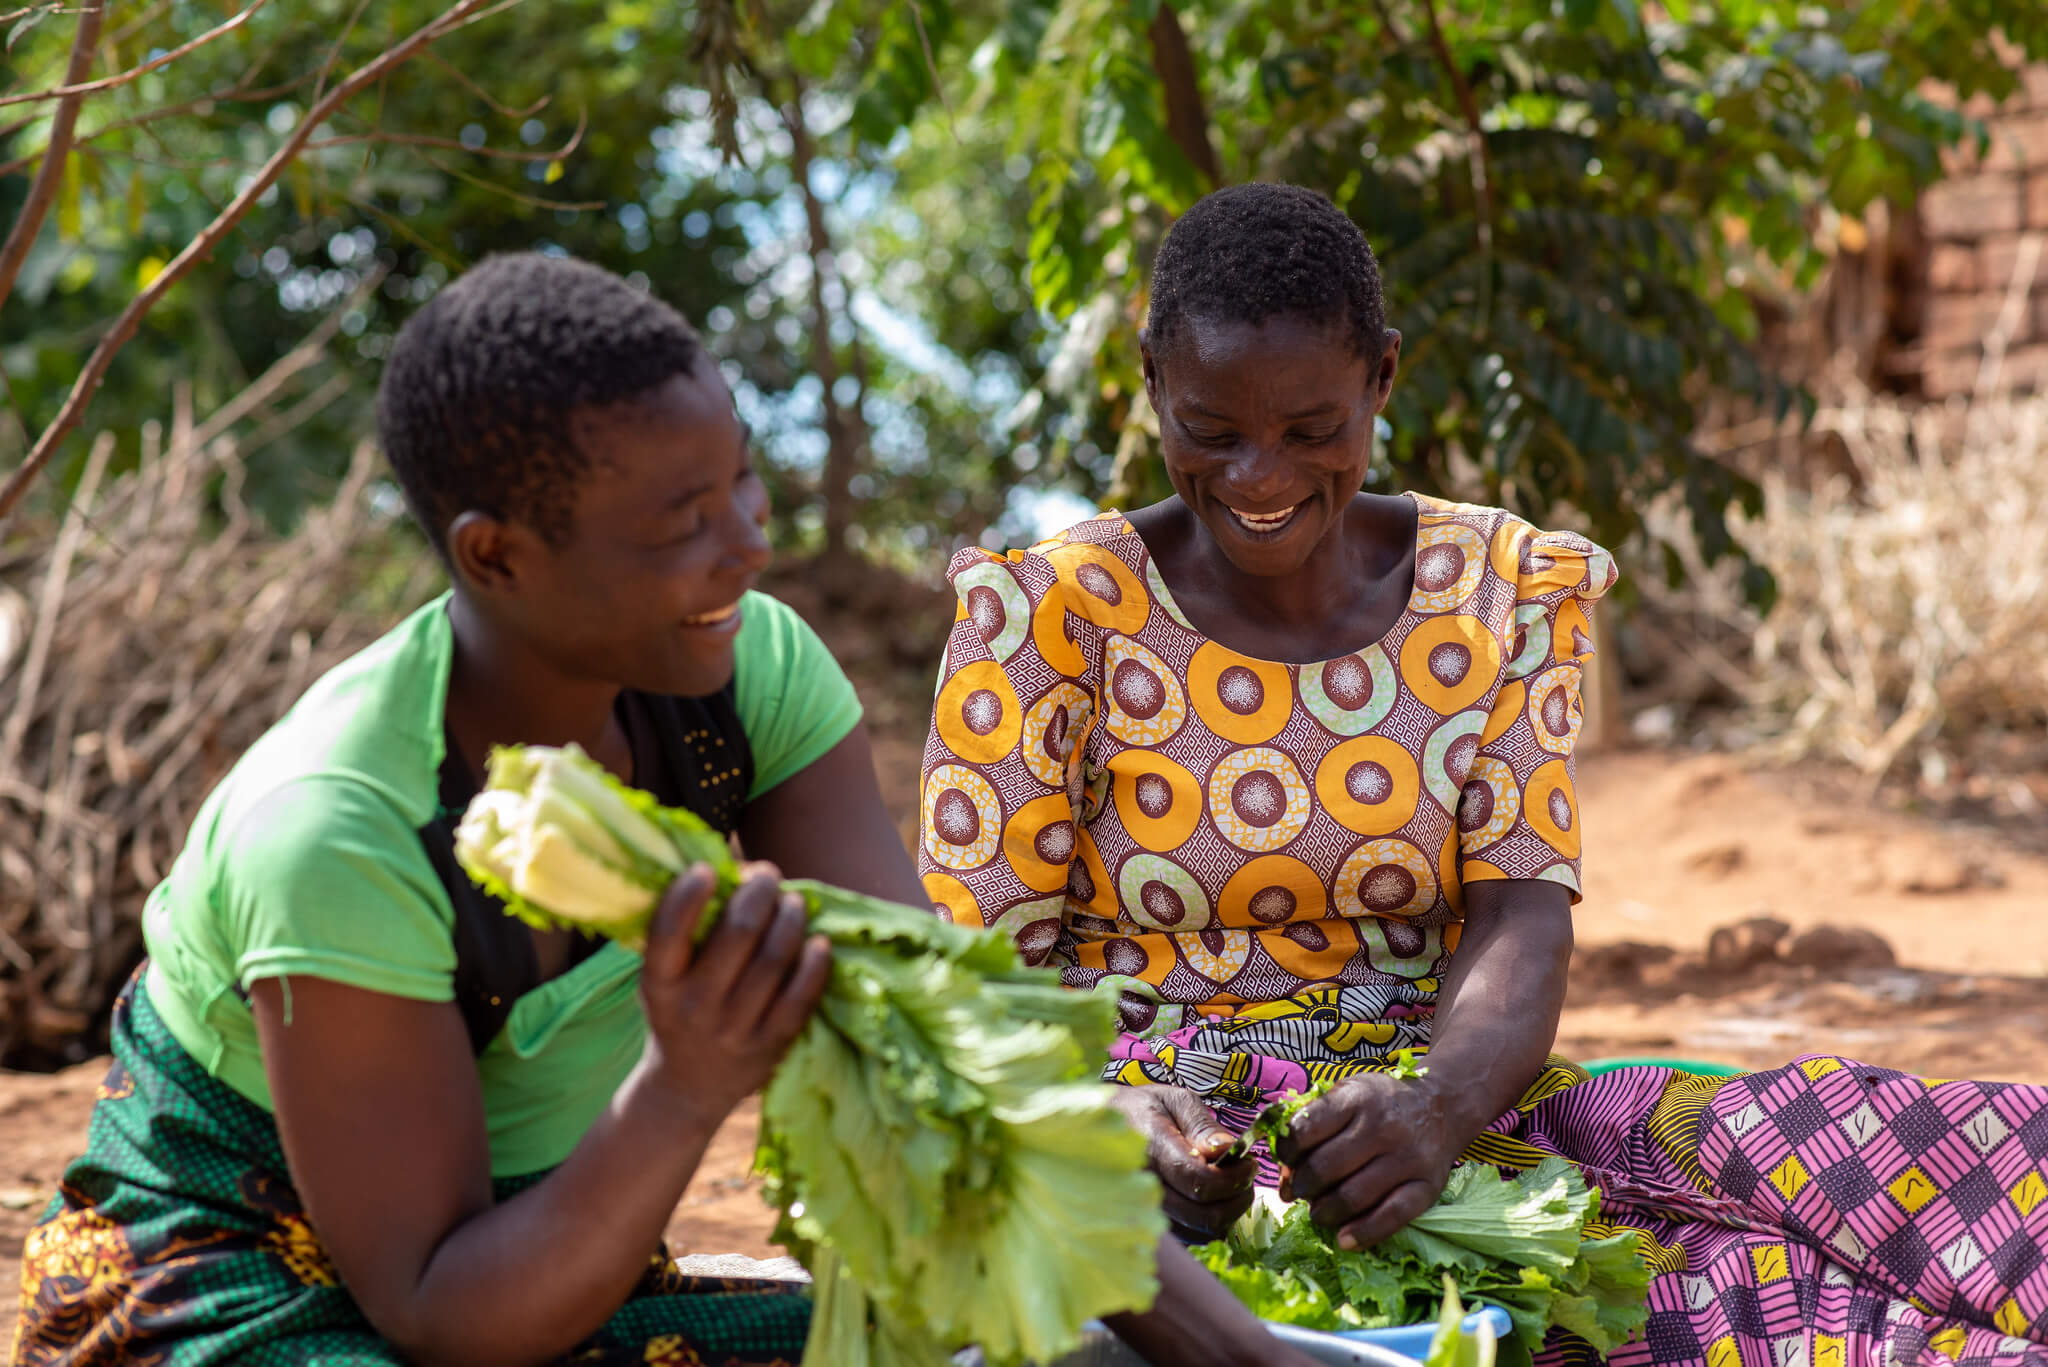 Christina Daelo (right) prepares vegetables for lunch with a relative. Mchiramwera, Thyolo District, Malawi. Image: ETP/Homeline Media